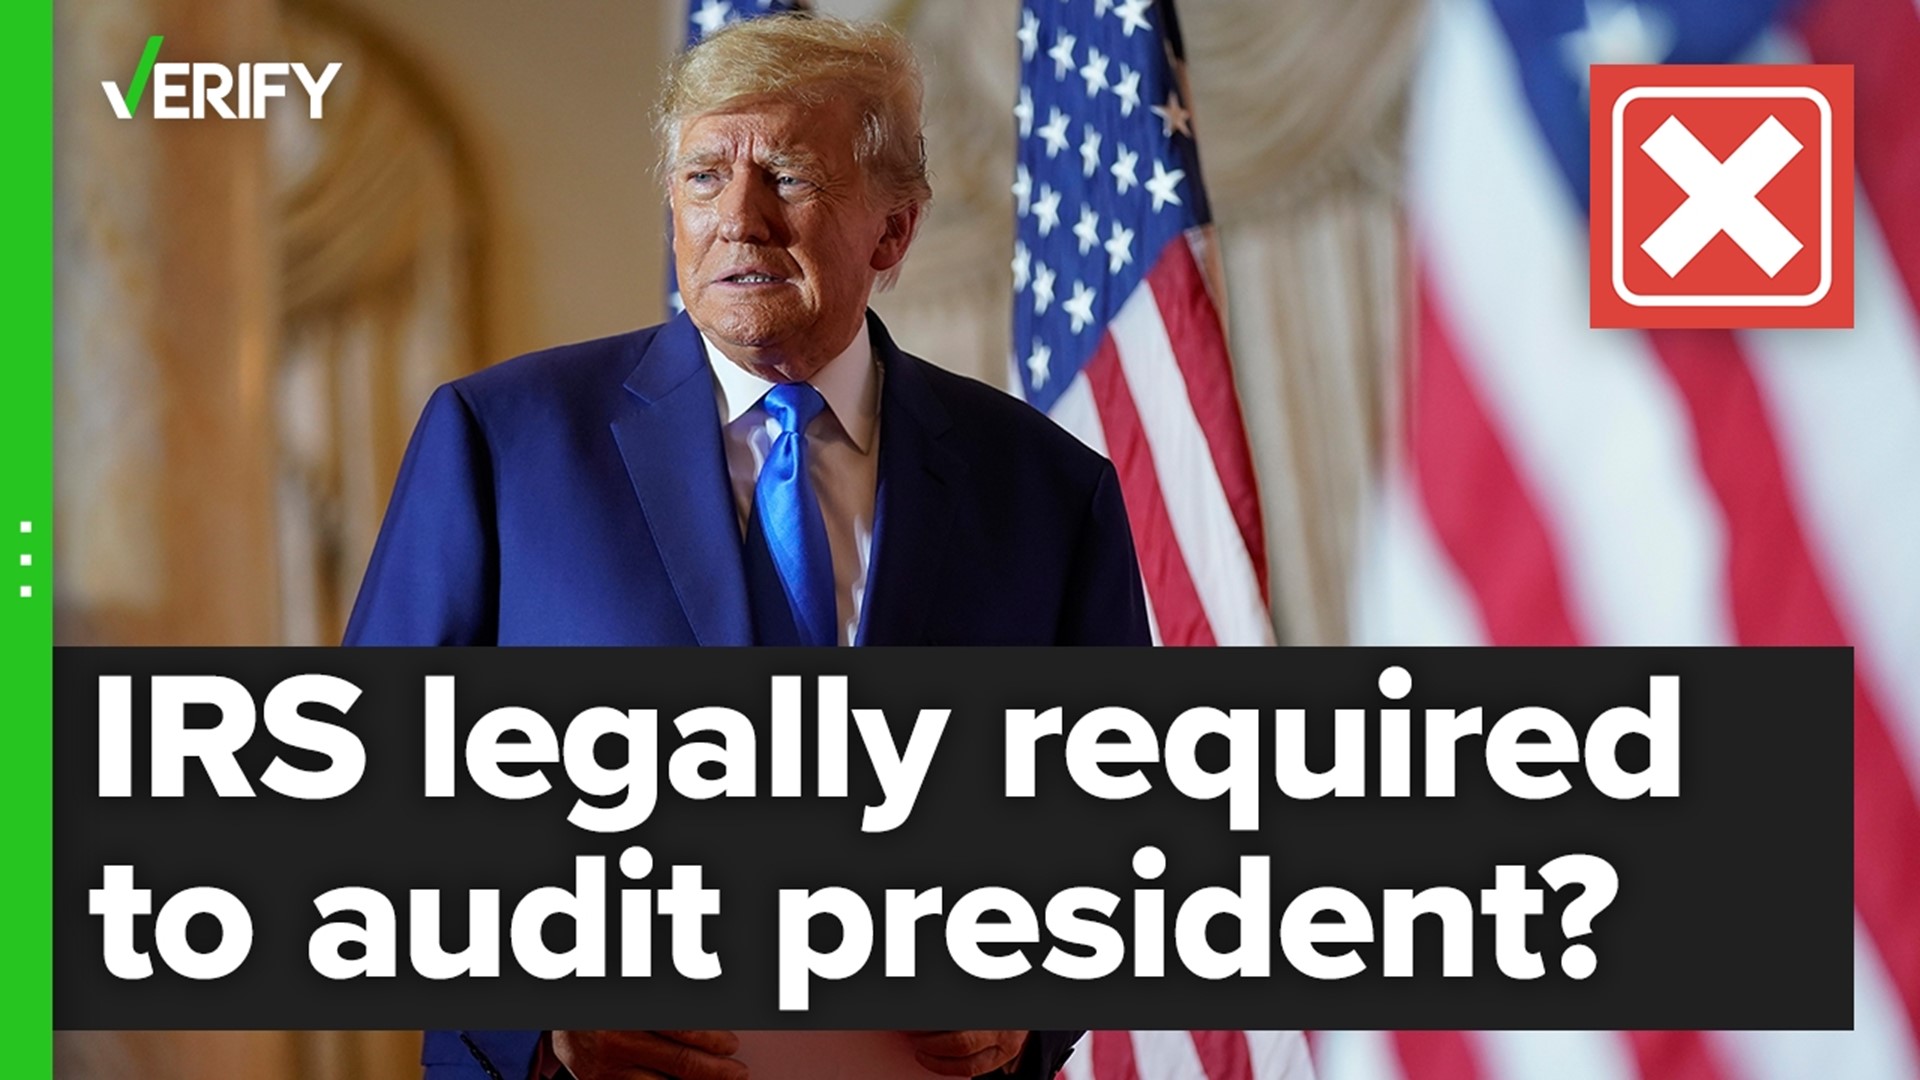 Presidential audits have been official IRS policy since 1977, but they aren’t mandated by law.